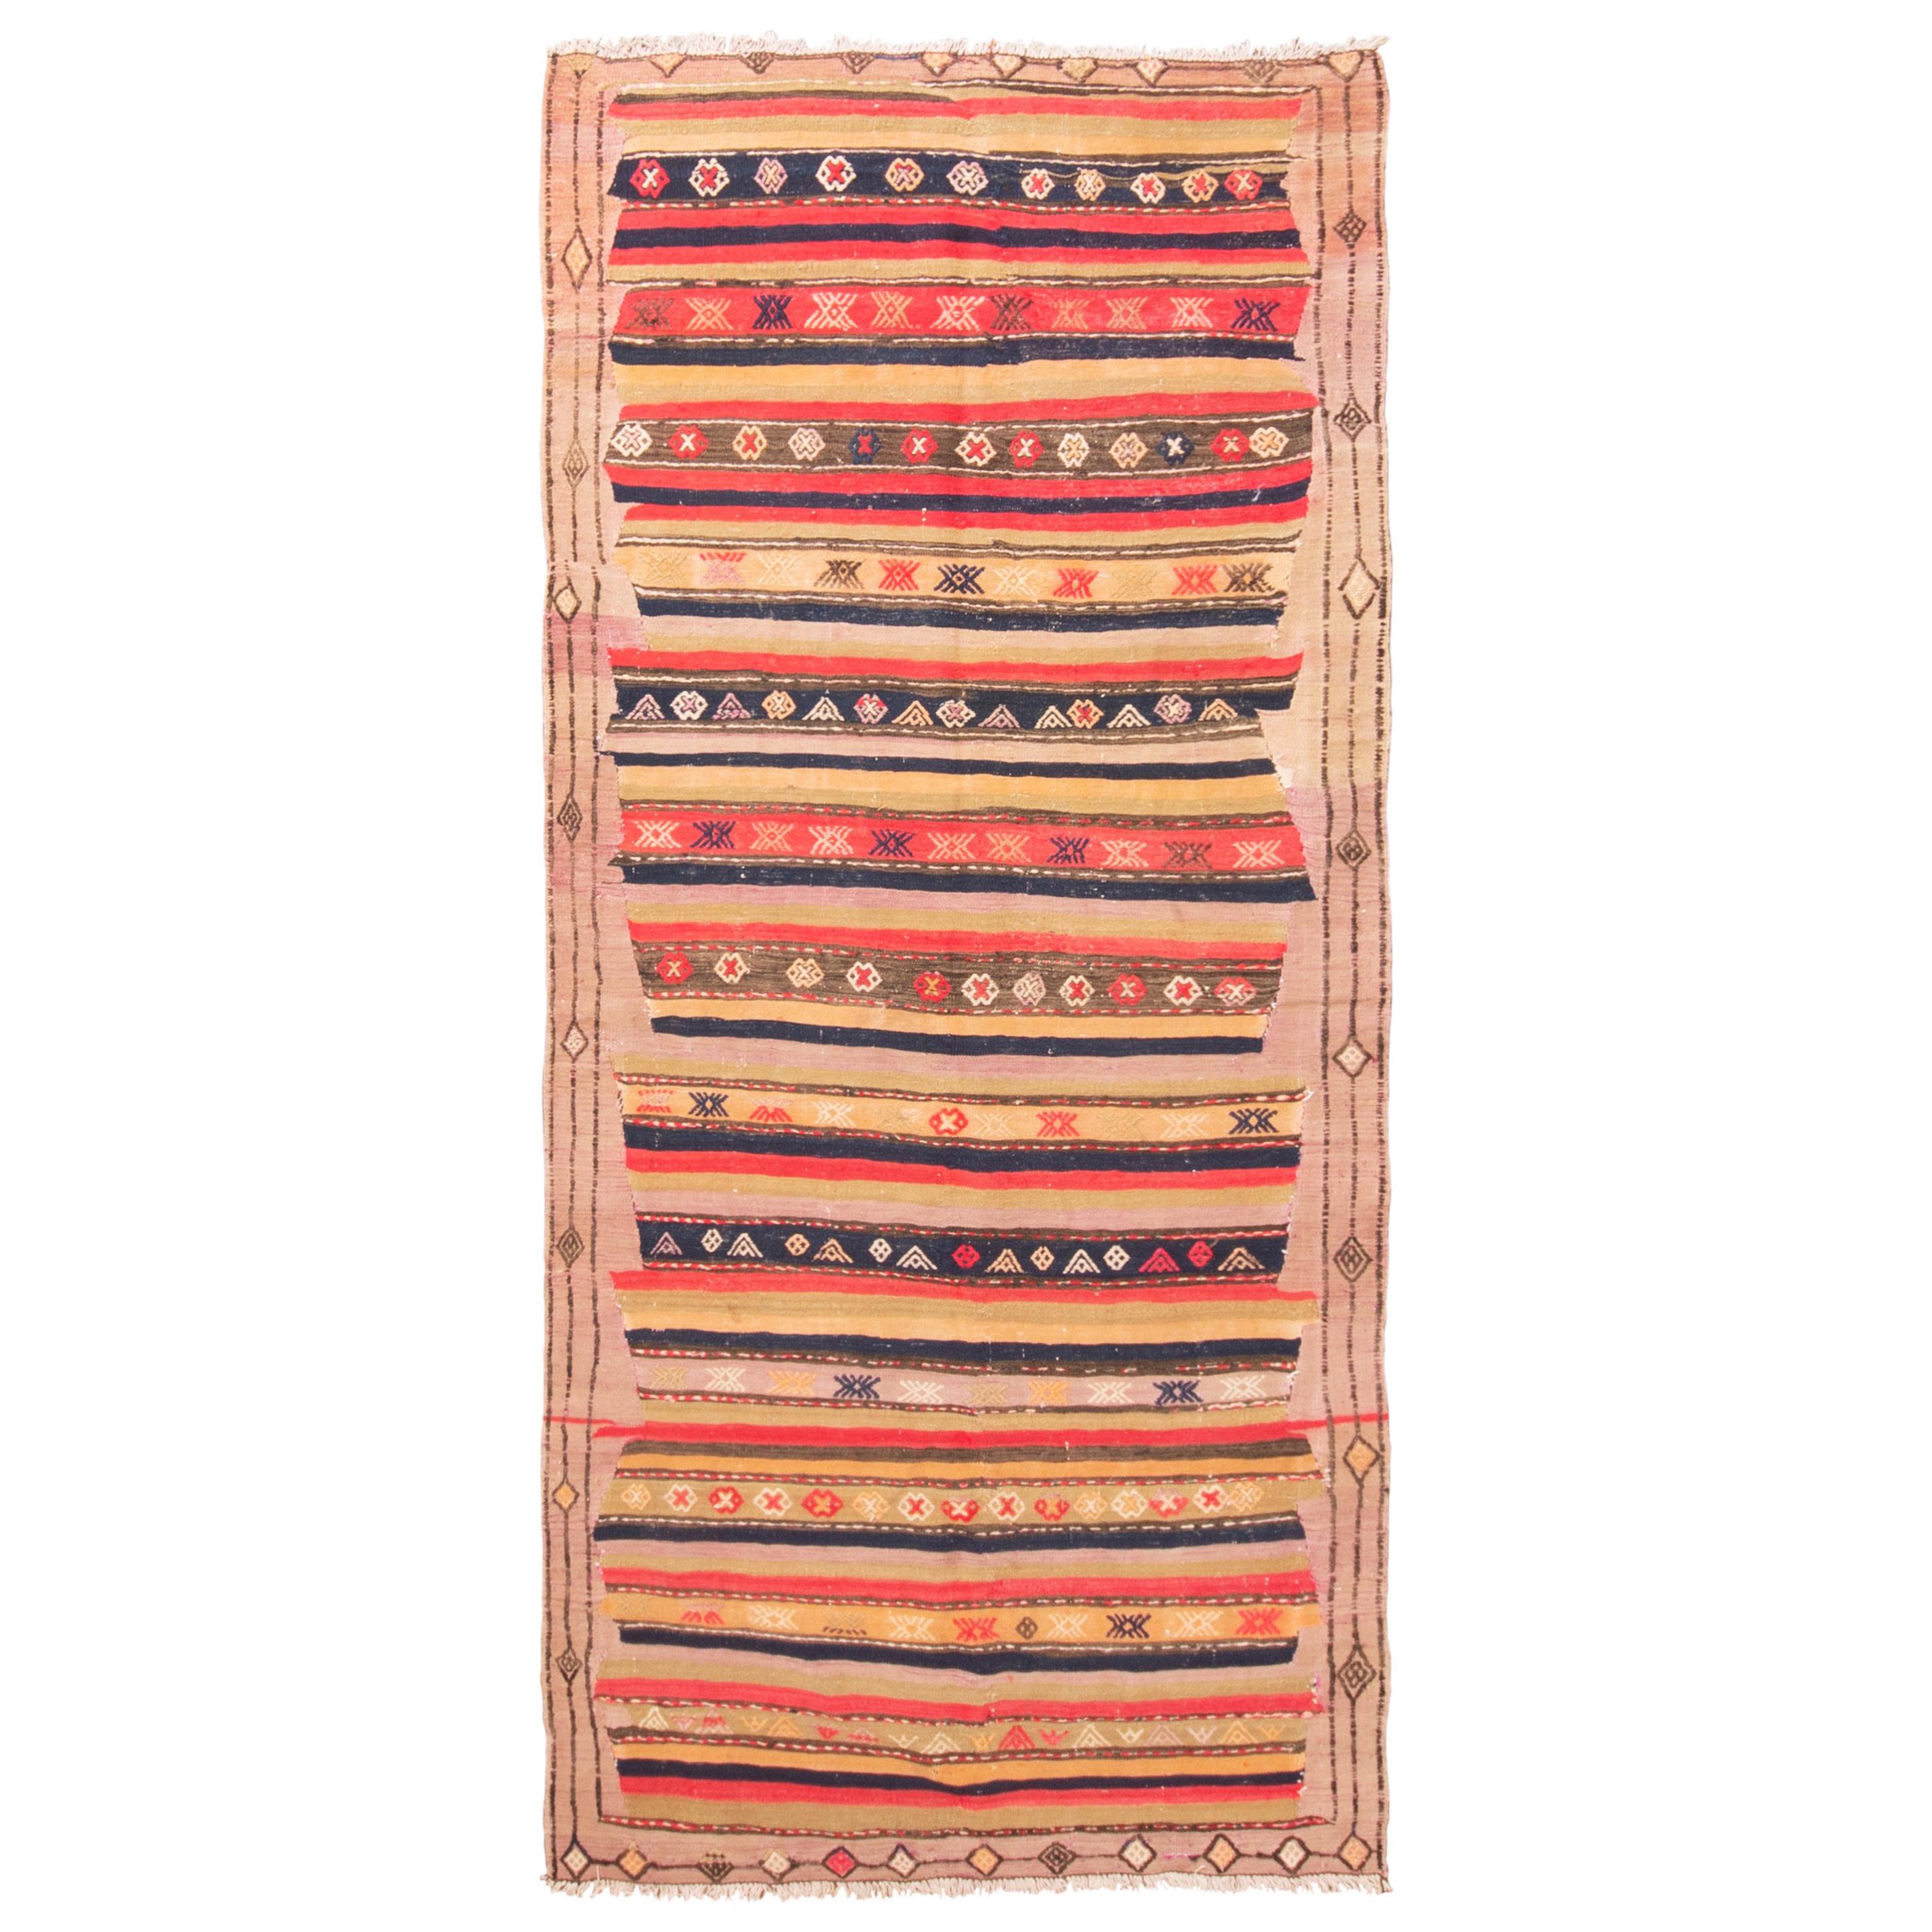 Antique Turkish Beige, Red, Yellow and Black Wool Kilim Rug